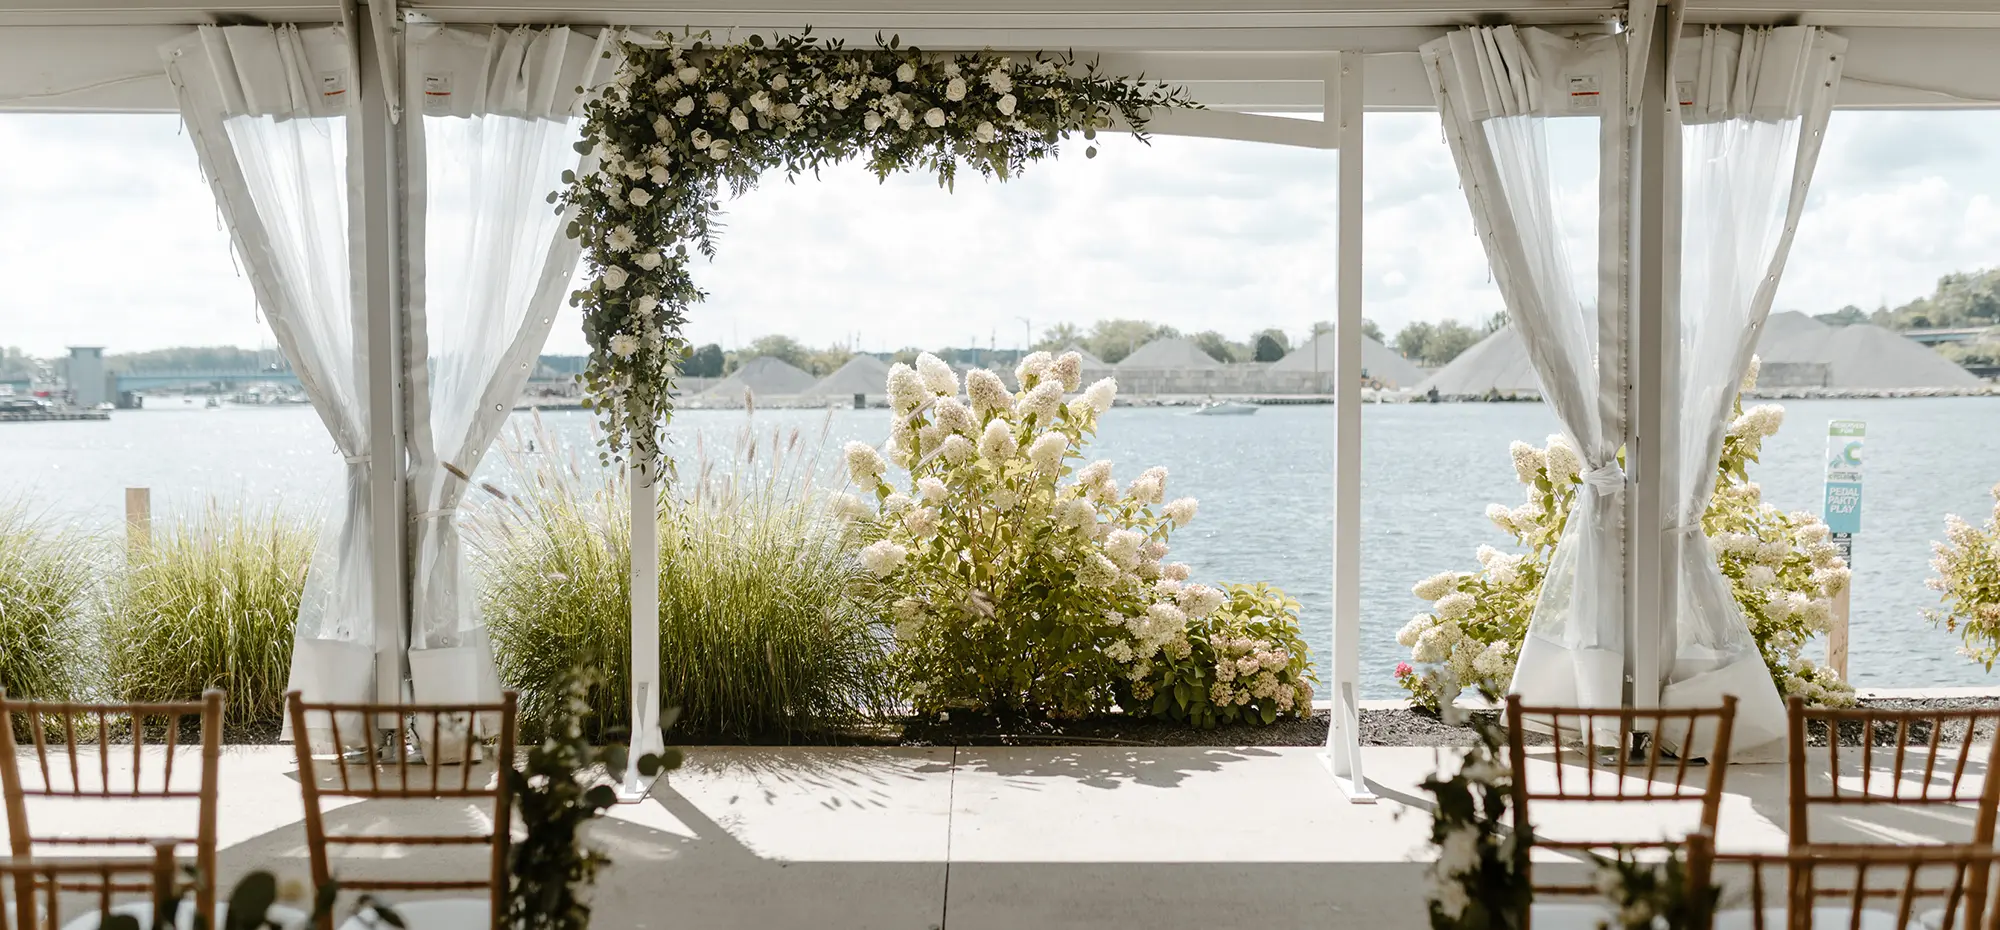 Outdoor landscape photograph of a white wedding overhead canopy display with a white flower arch decoration and a few chairs nearby as the setup is overlooking a body of water at The Inn at Harbor Shores venue